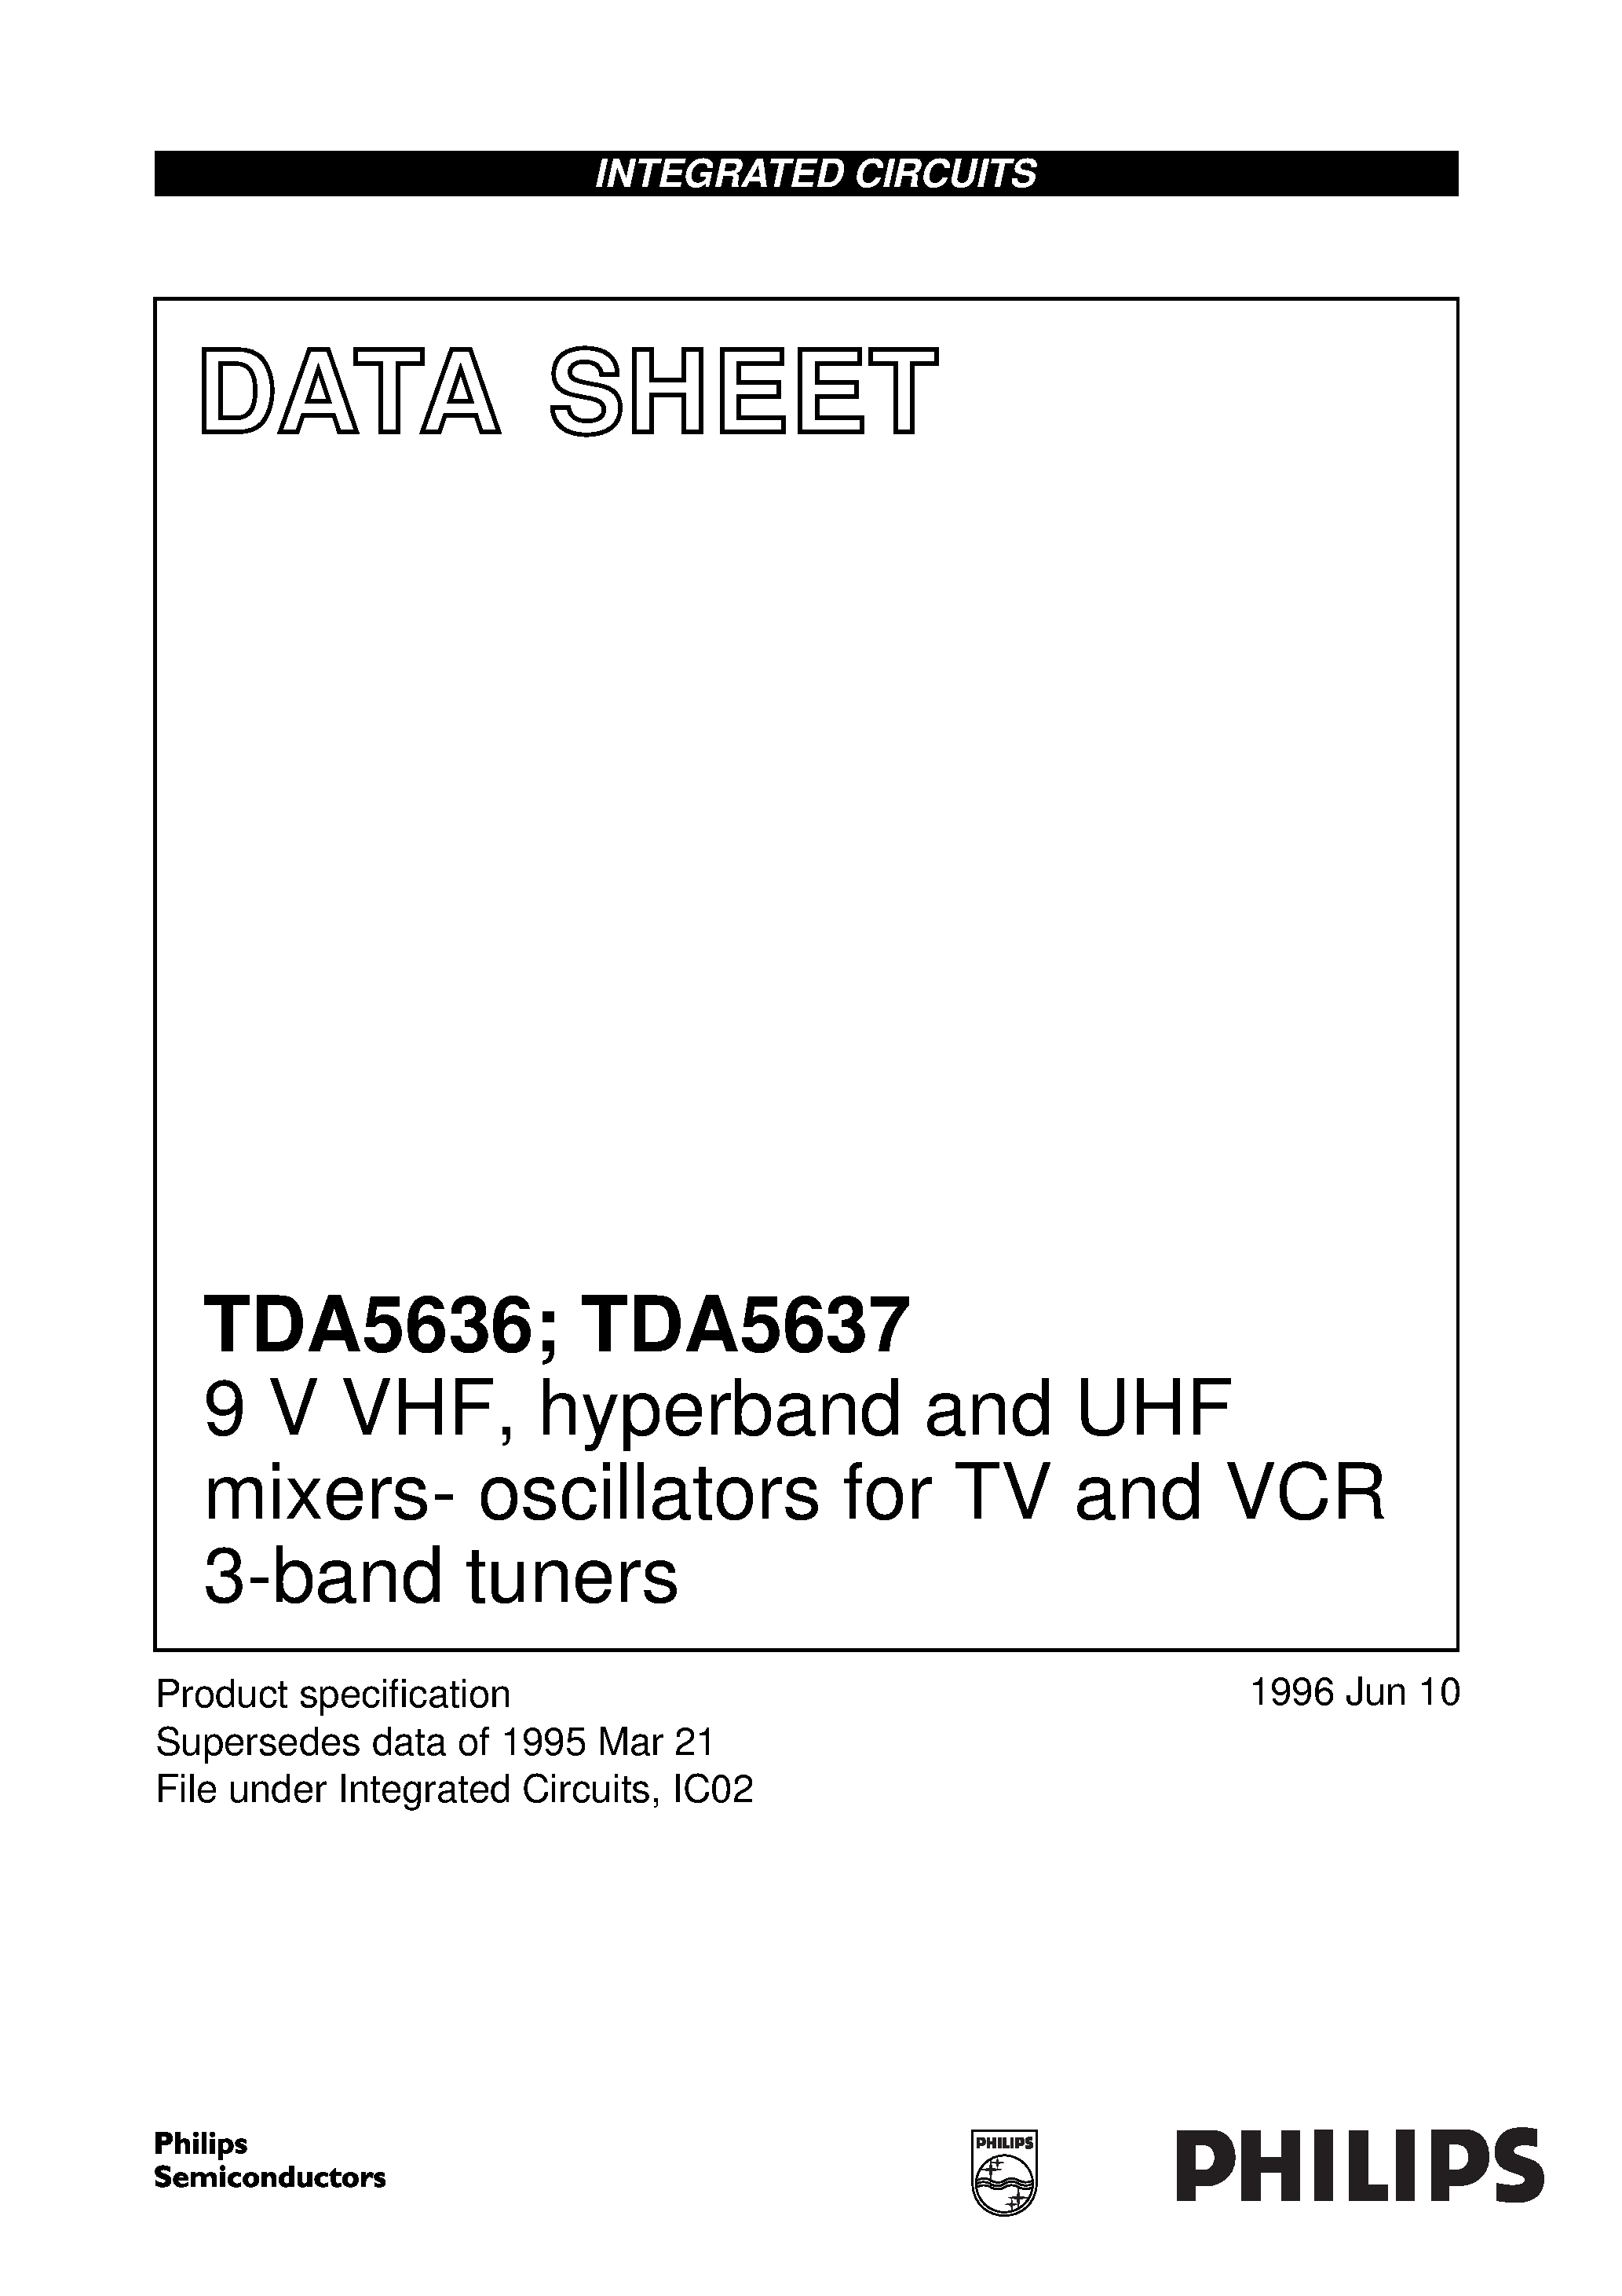 Datasheet TDA5636 - 9 V VHF/ hyperband and UHF mixers- oscillators for TV and VCR 3-band tuners page 1